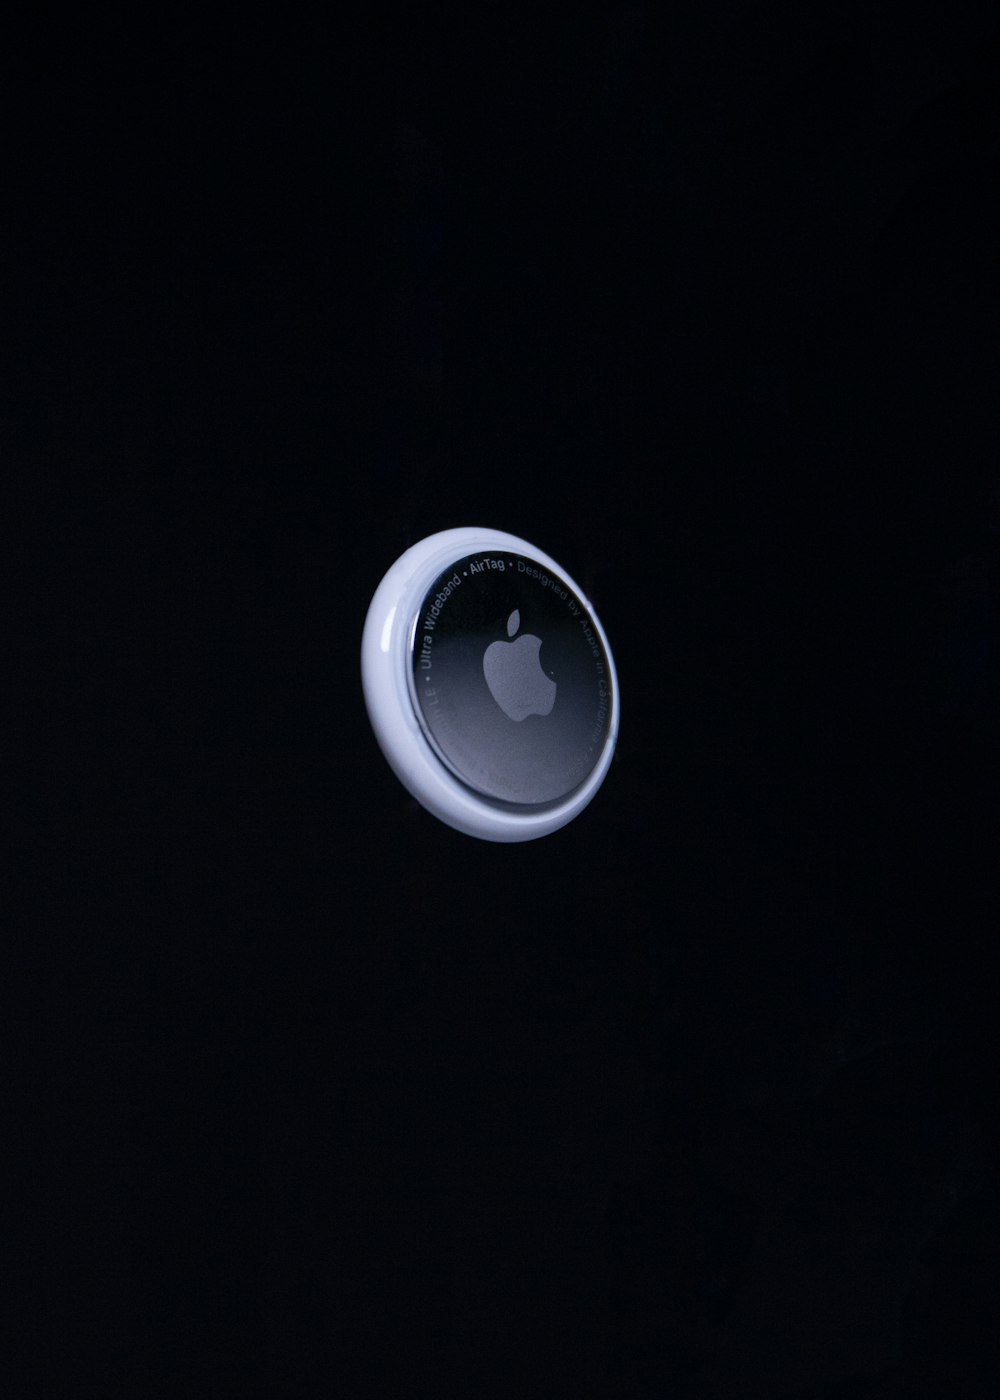 an apple logo is shown on a black background